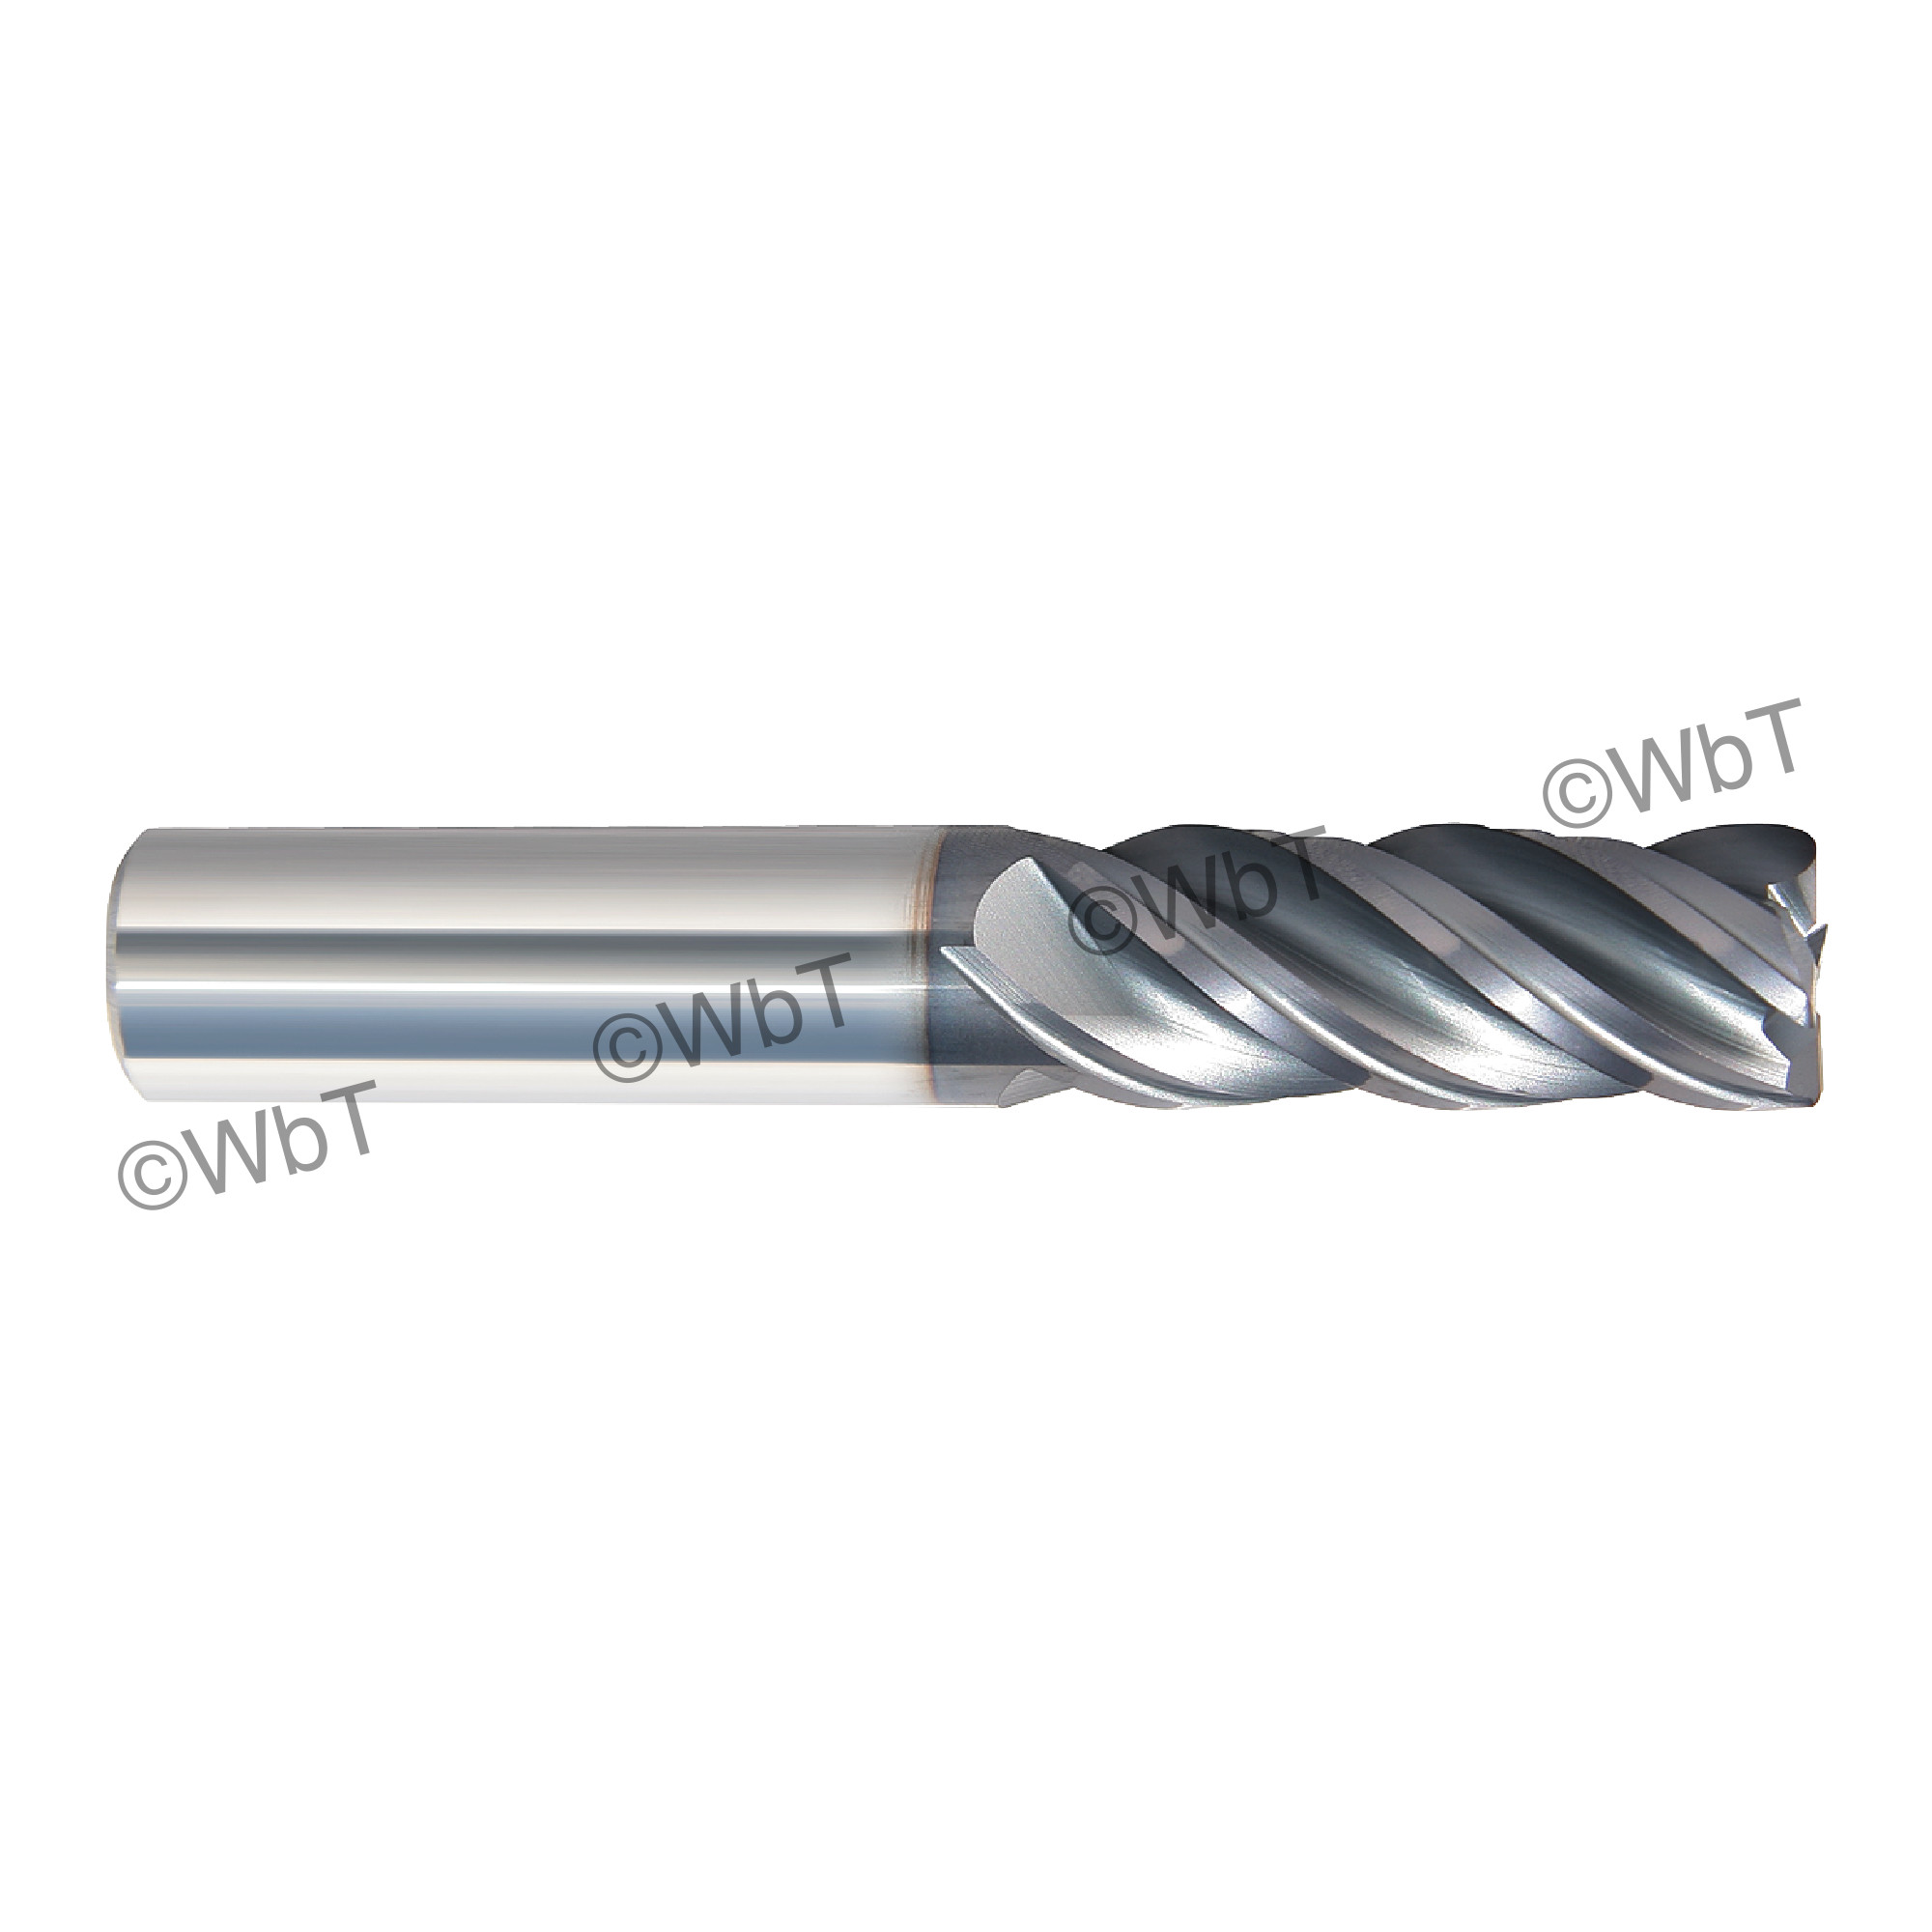 Rushmore USA 1/2" x 2" Flute Solid Carbide Variable Helix Unequal Index AlTiN Coated Corner Radius 4 Flute Roughing & Fi